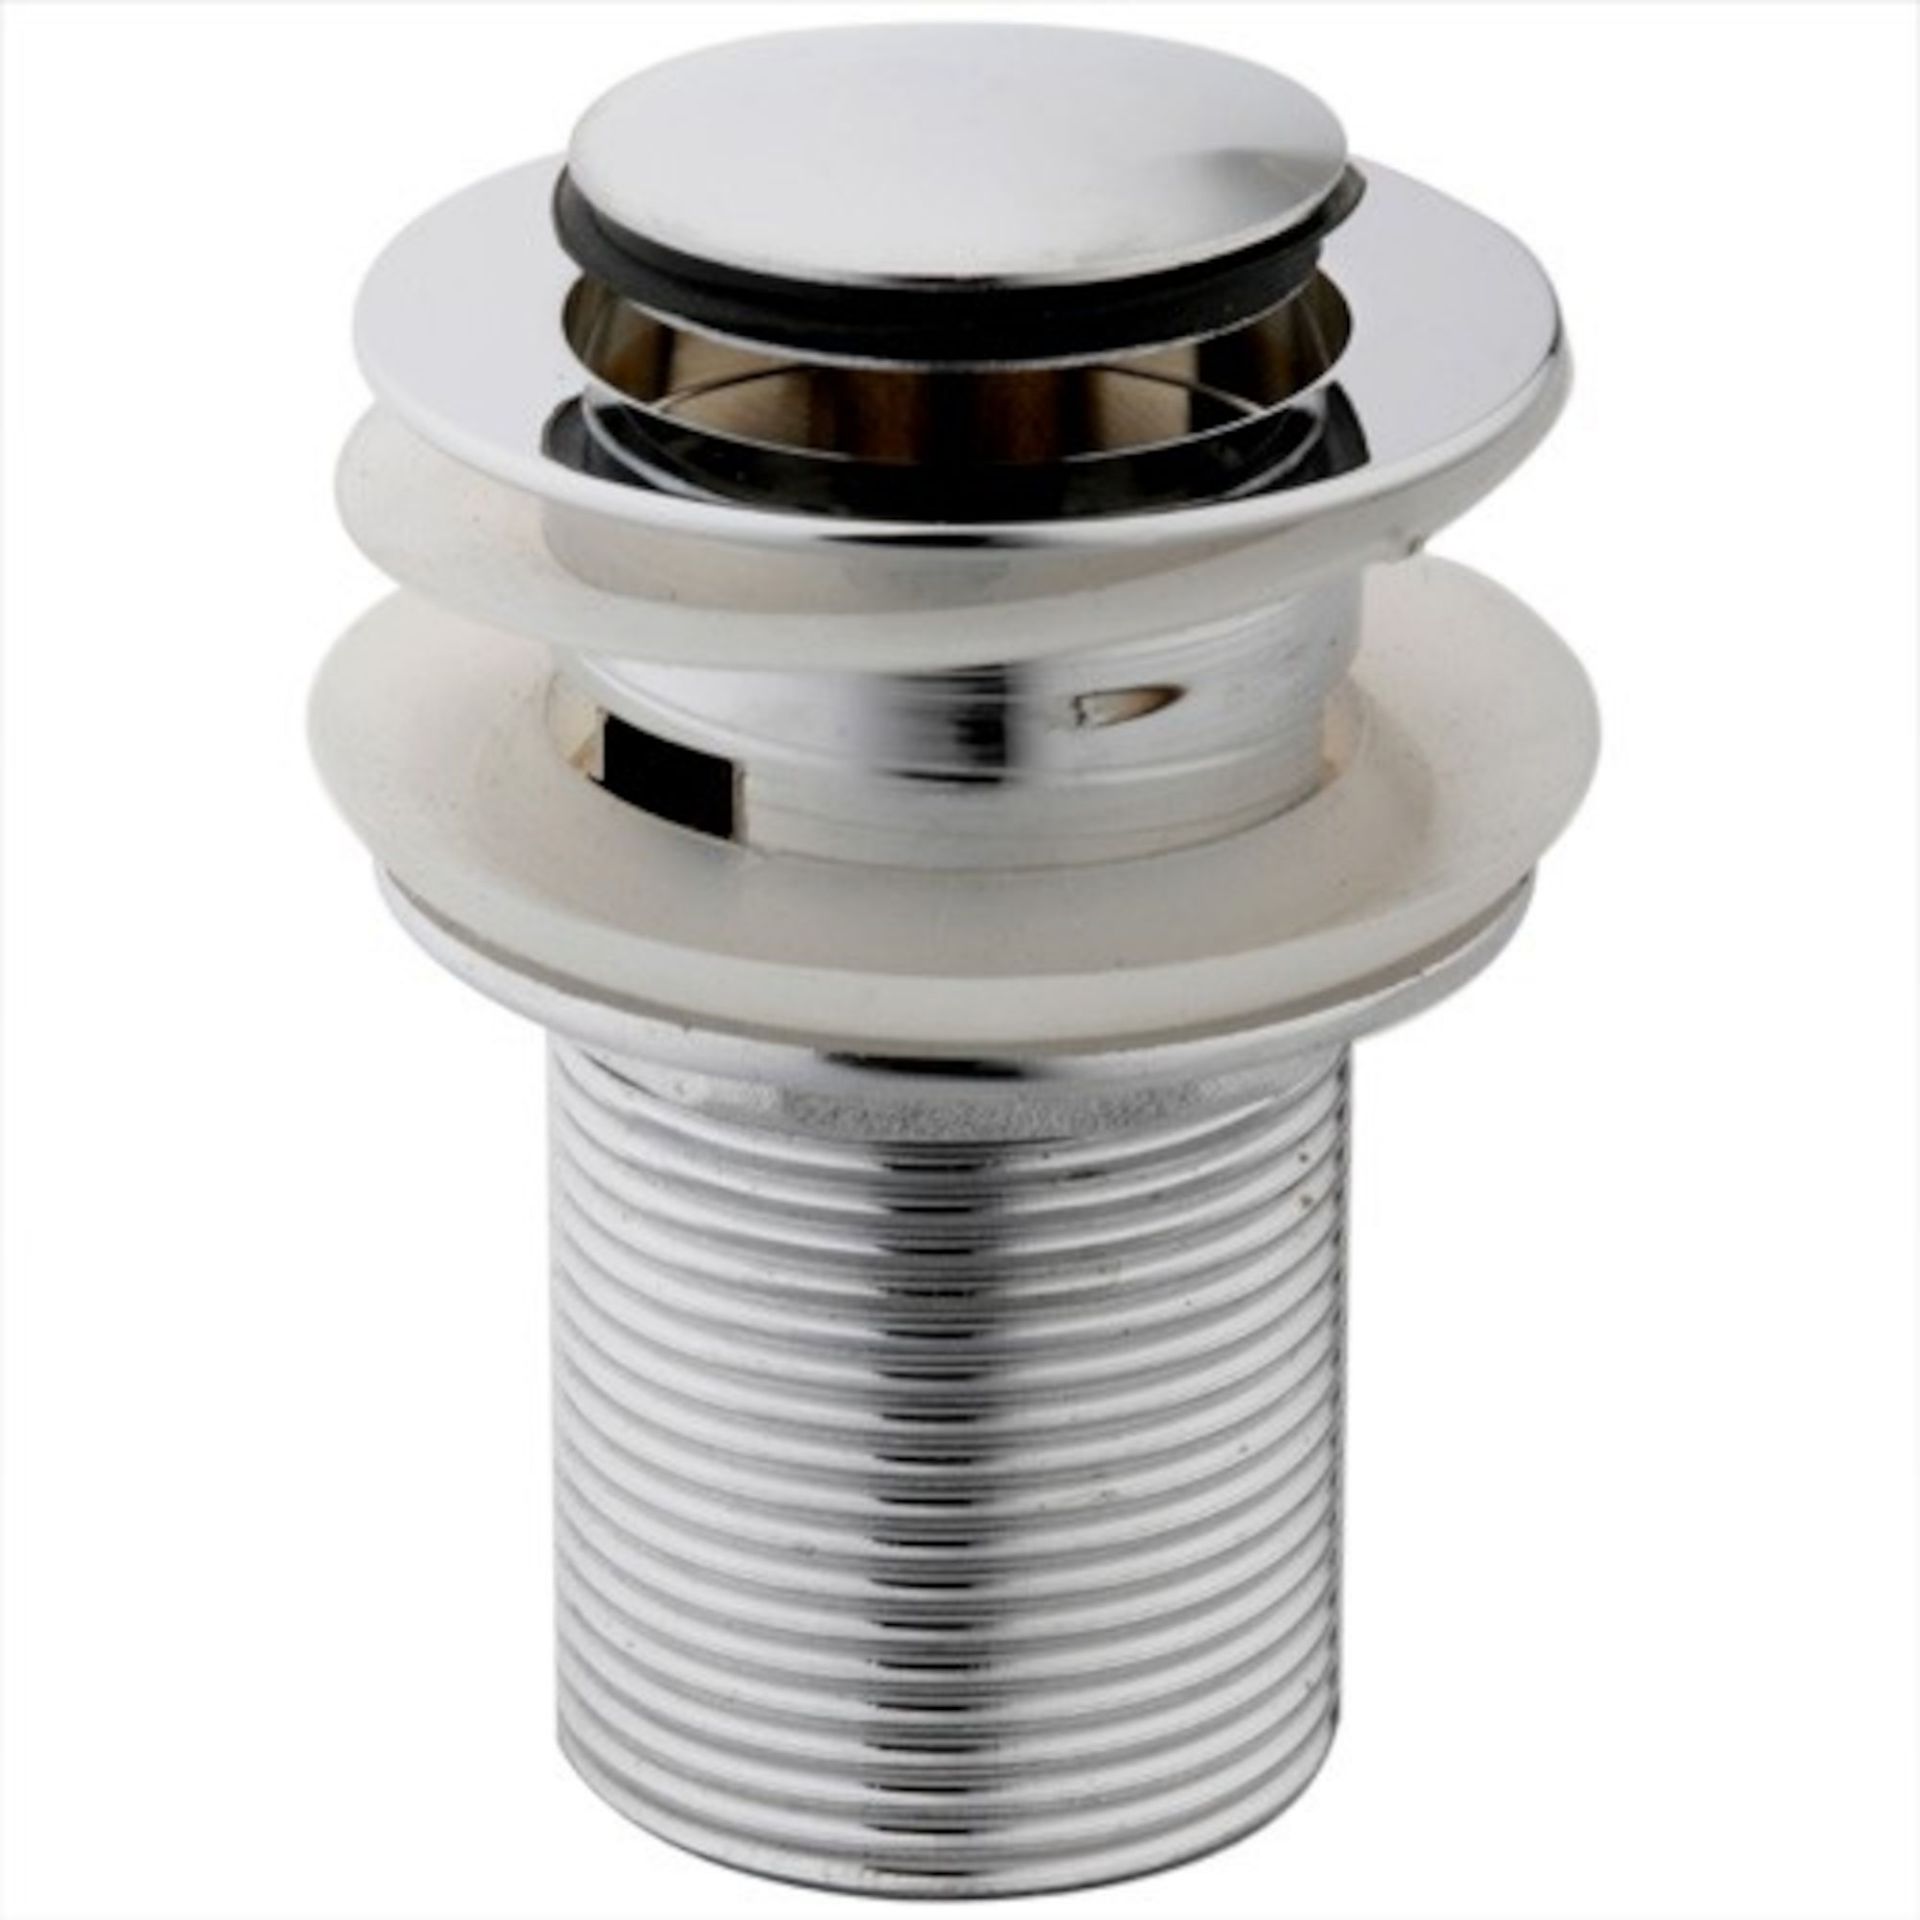 (YU1028) Basin Waste - Slotted Push Button Pop-Up Made with zinc with solid brass components ...